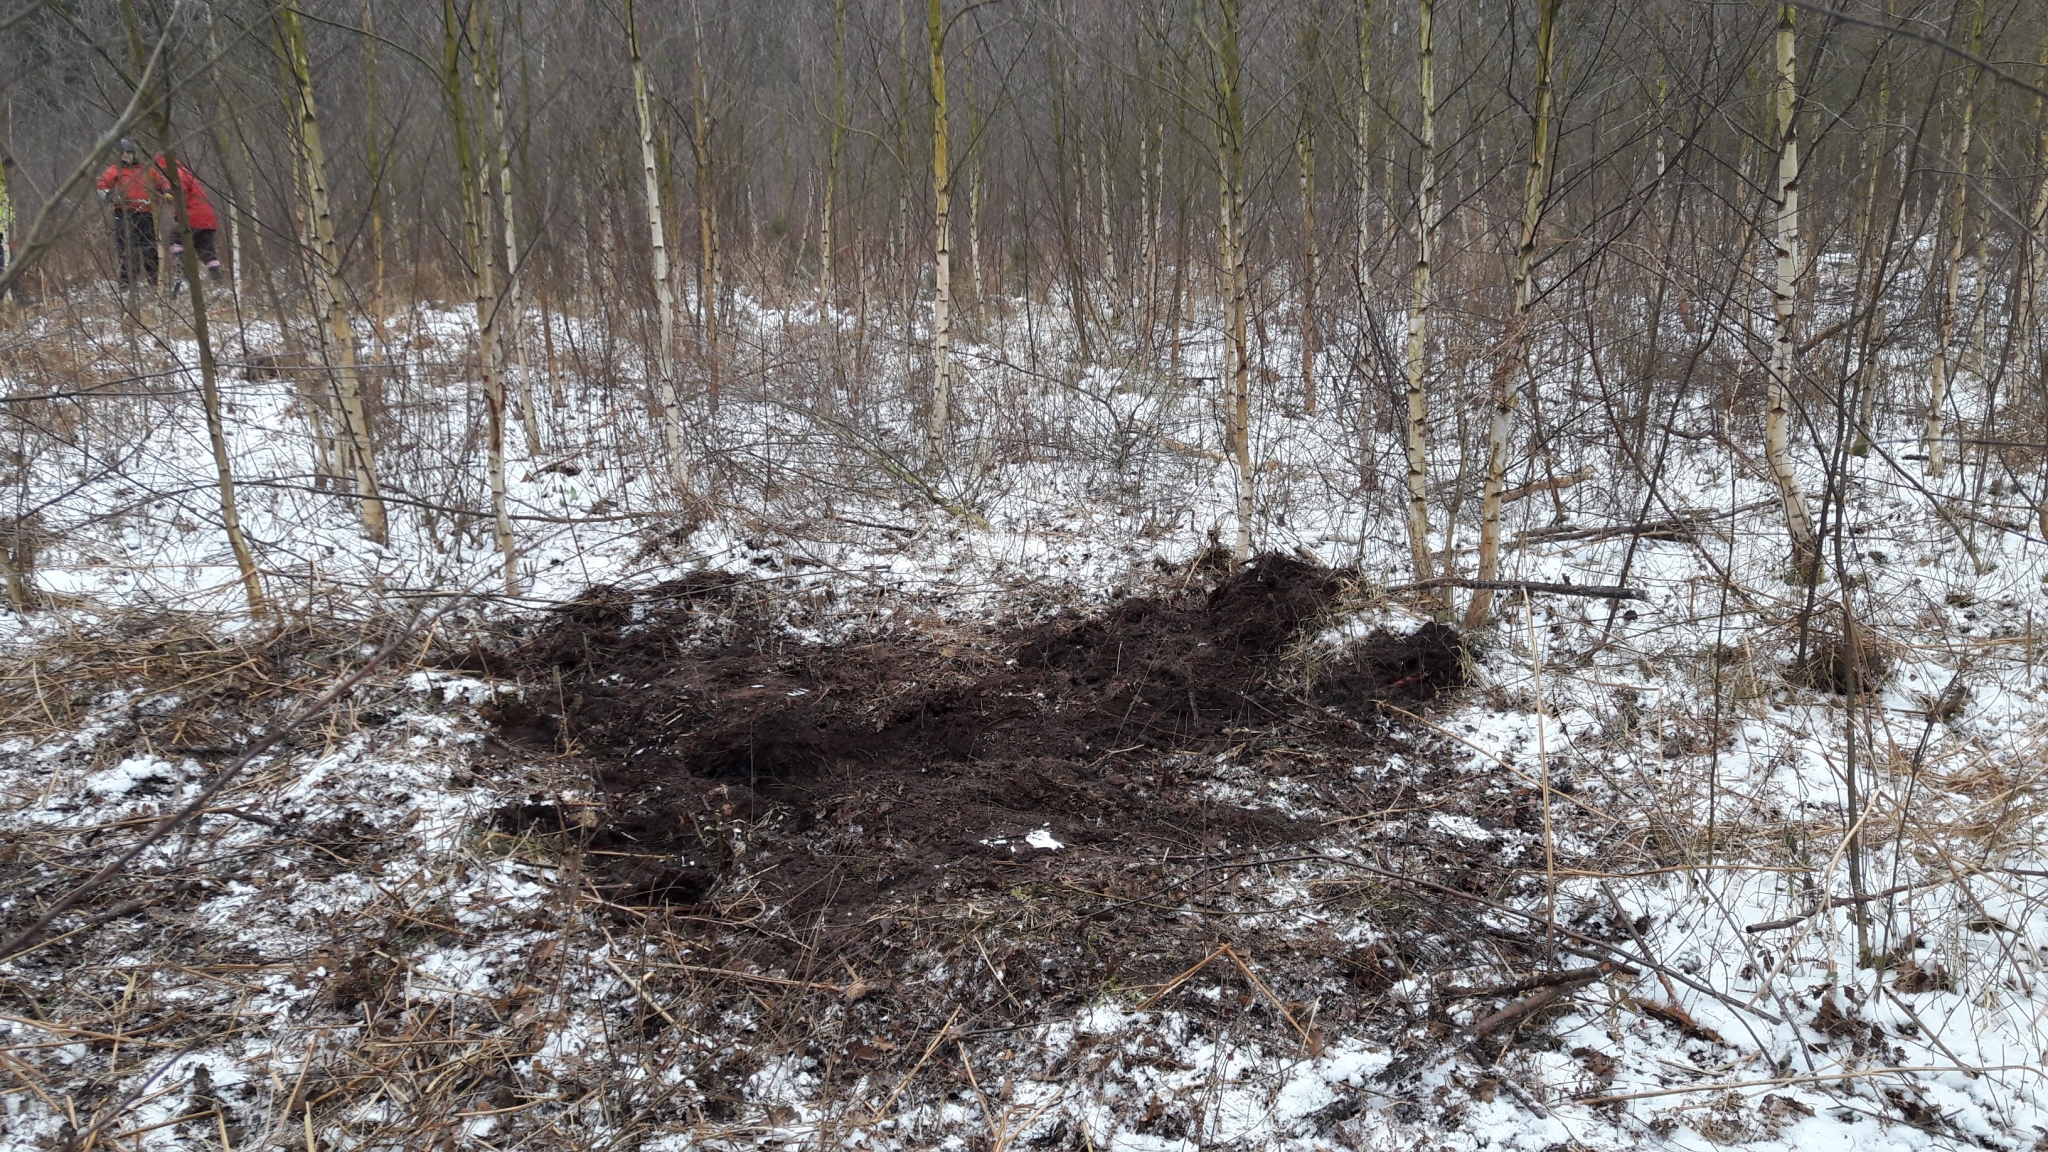 A photo from the FoTF Conservation Event - March 2018 - Birch Coppicing at High Lodge : A section of ground prepared by the volunteers